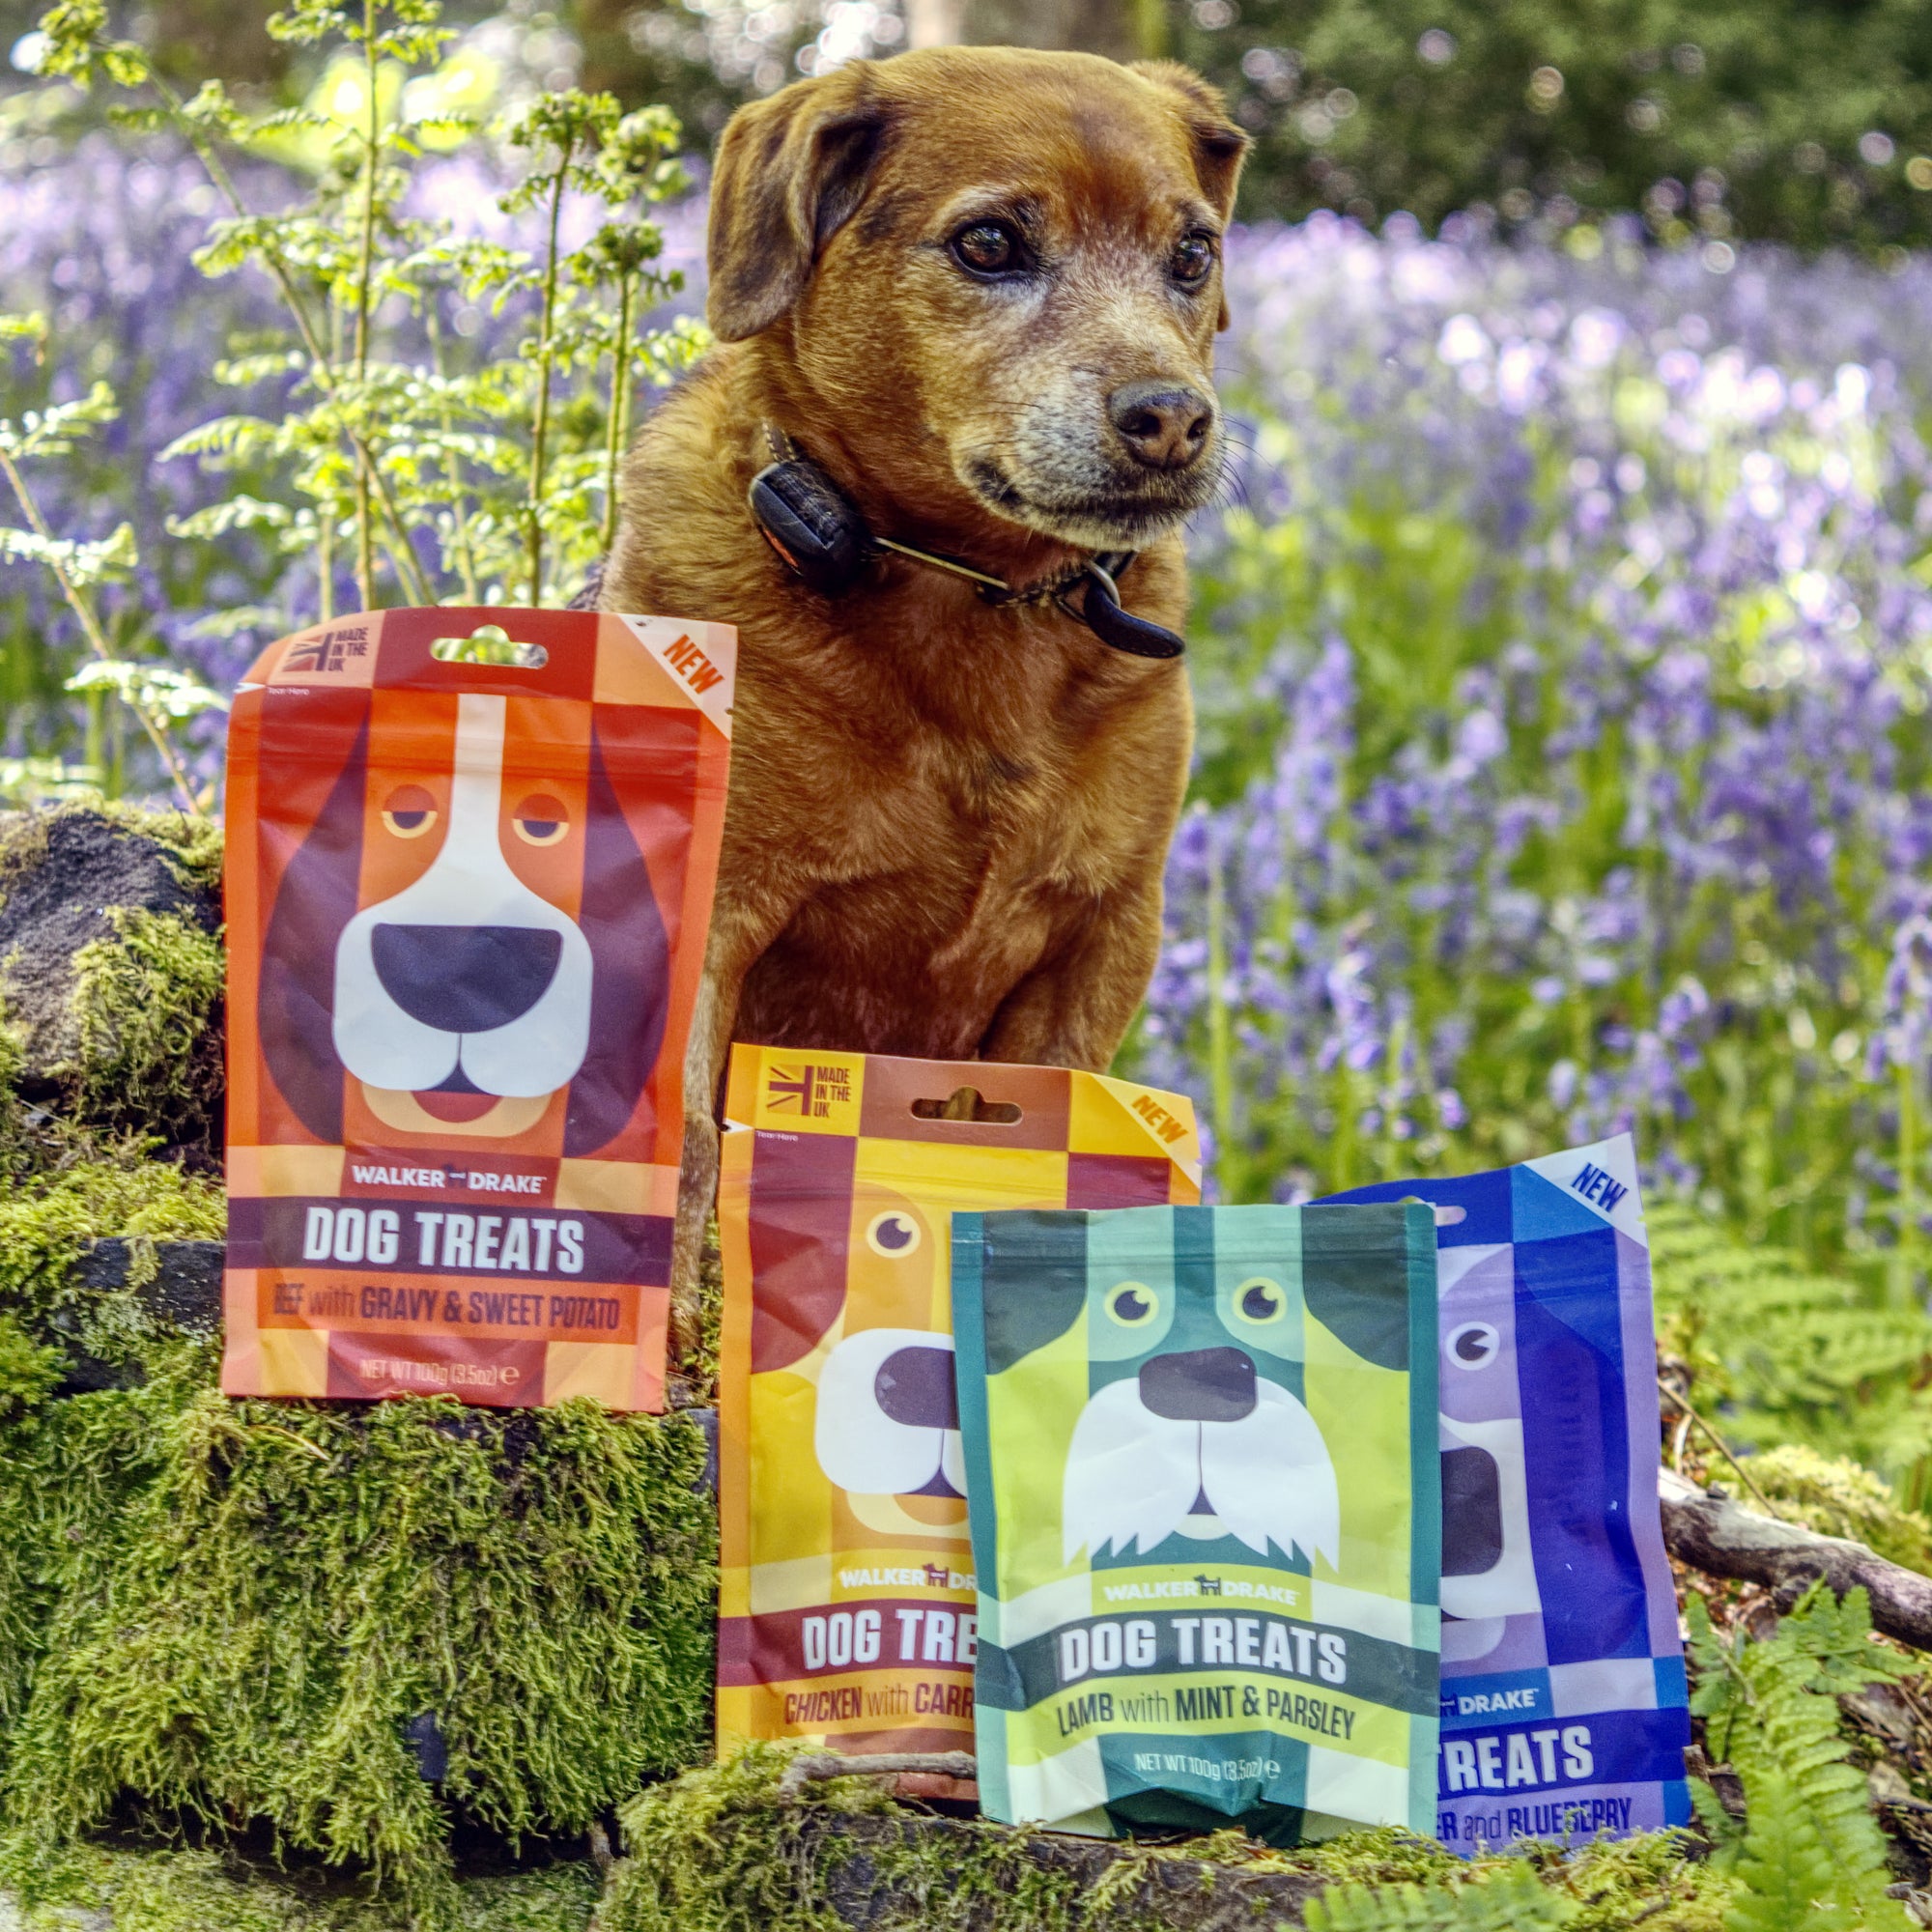 Jed with Training Treats for Dogs